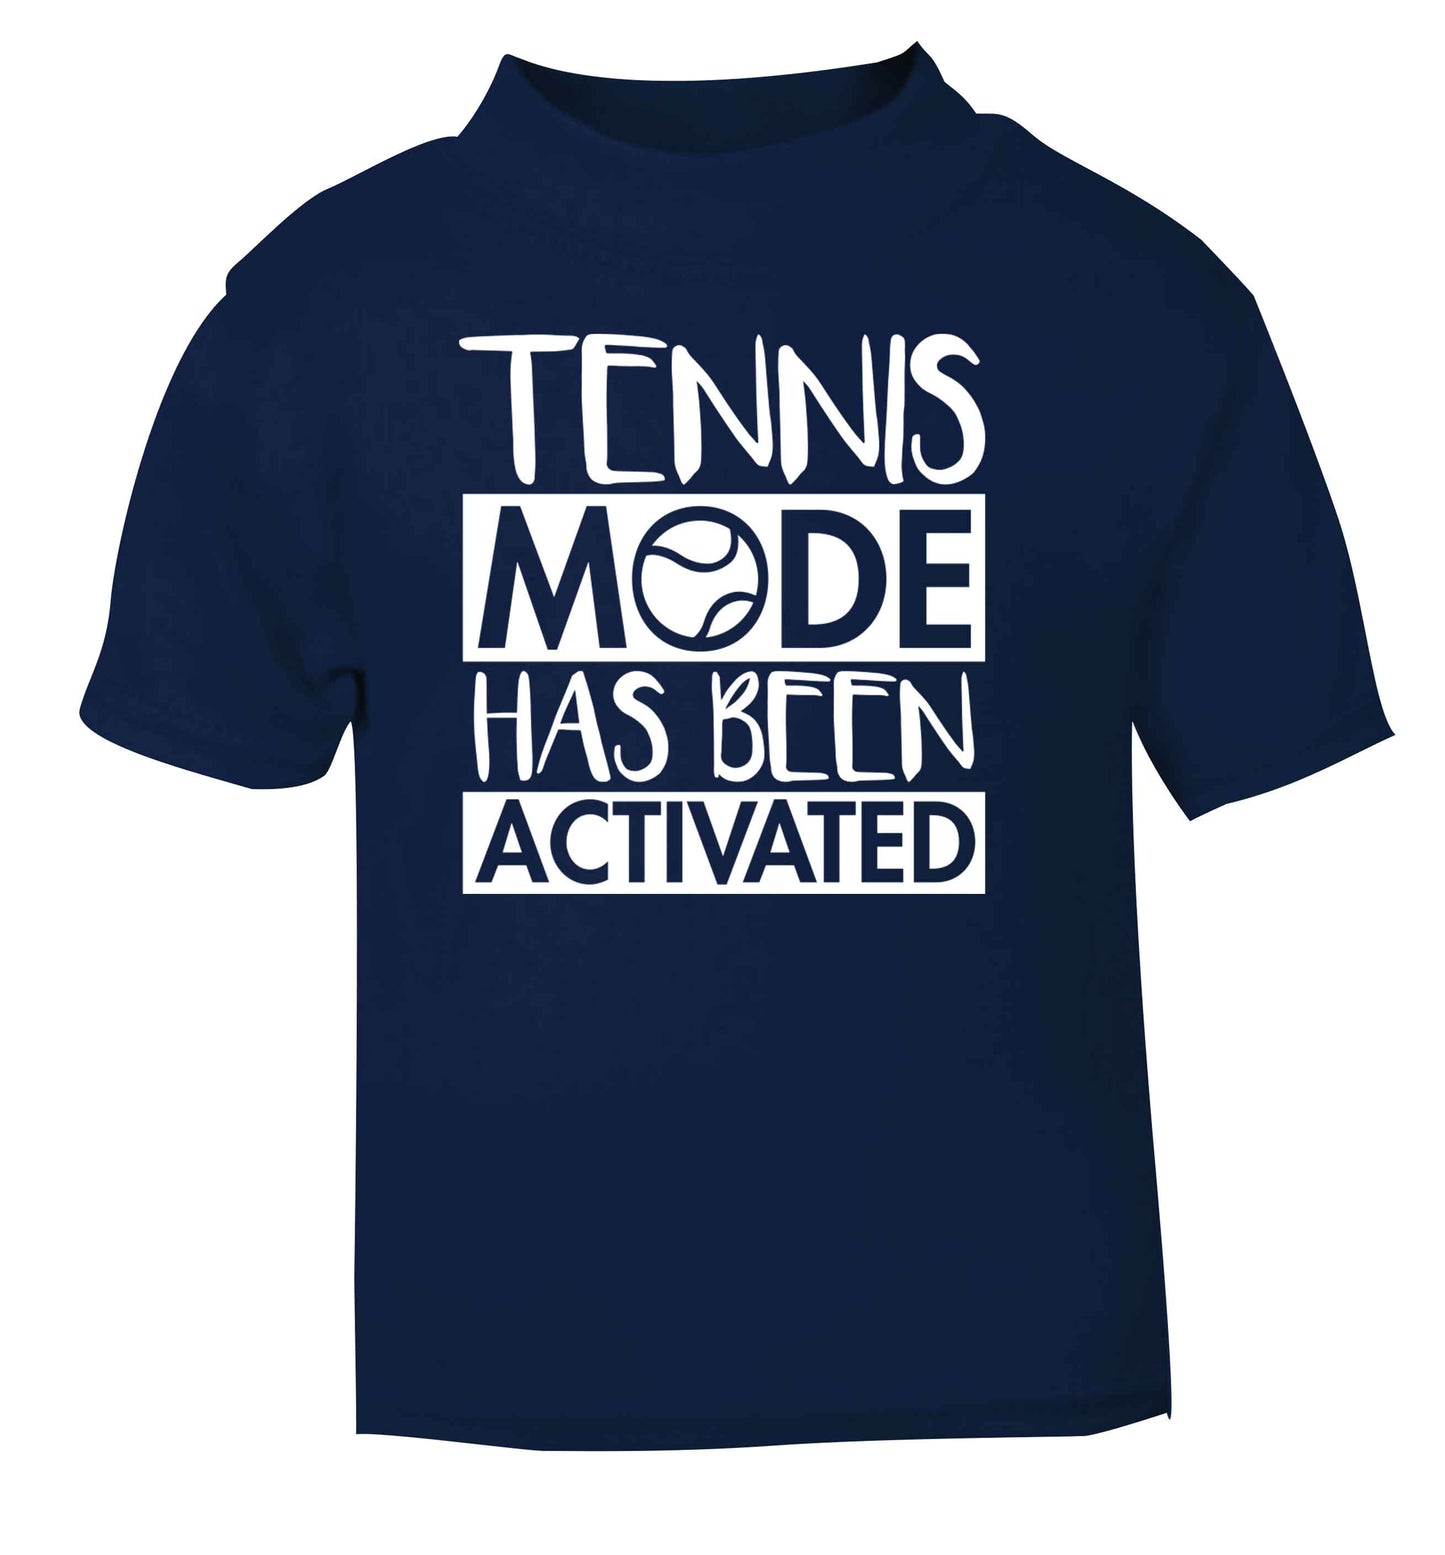 Tennis mode has been activated navy Baby Toddler Tshirt 2 Years